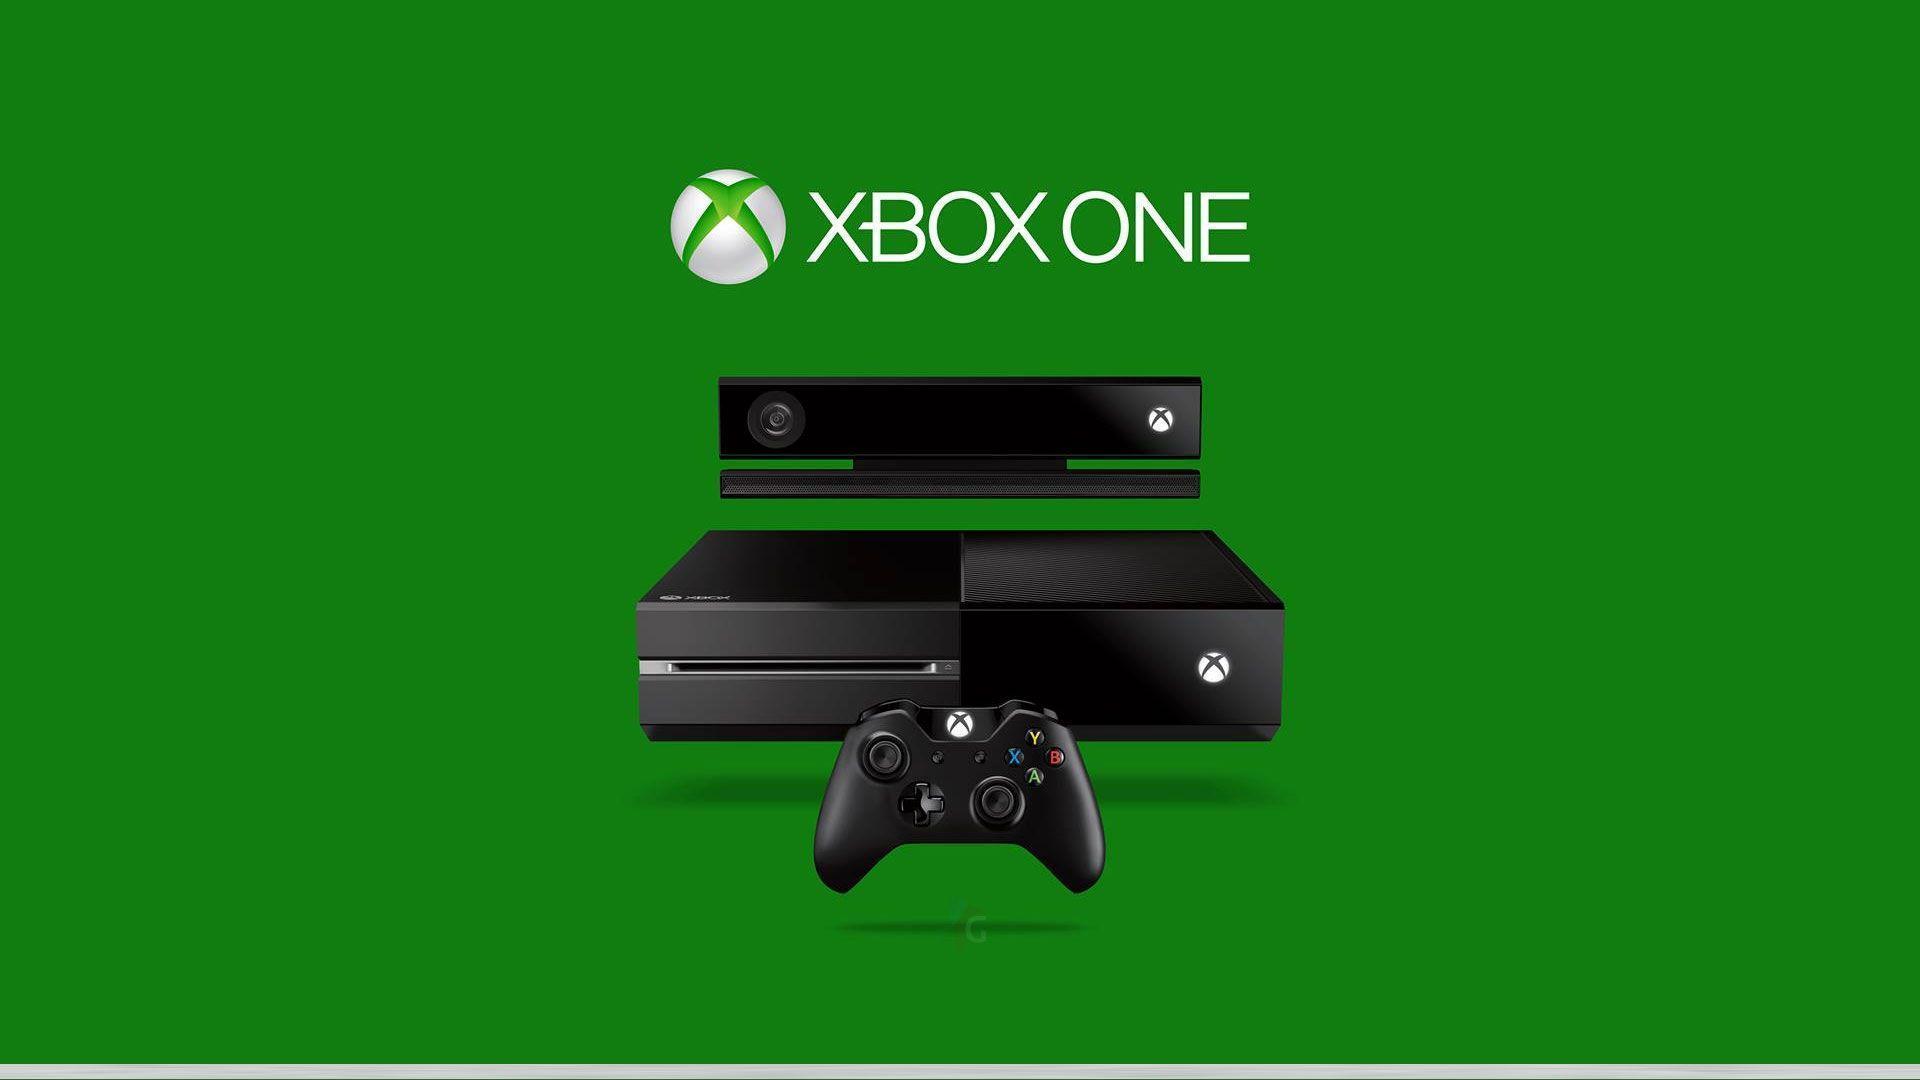 Xbox One Wallpaper in HD